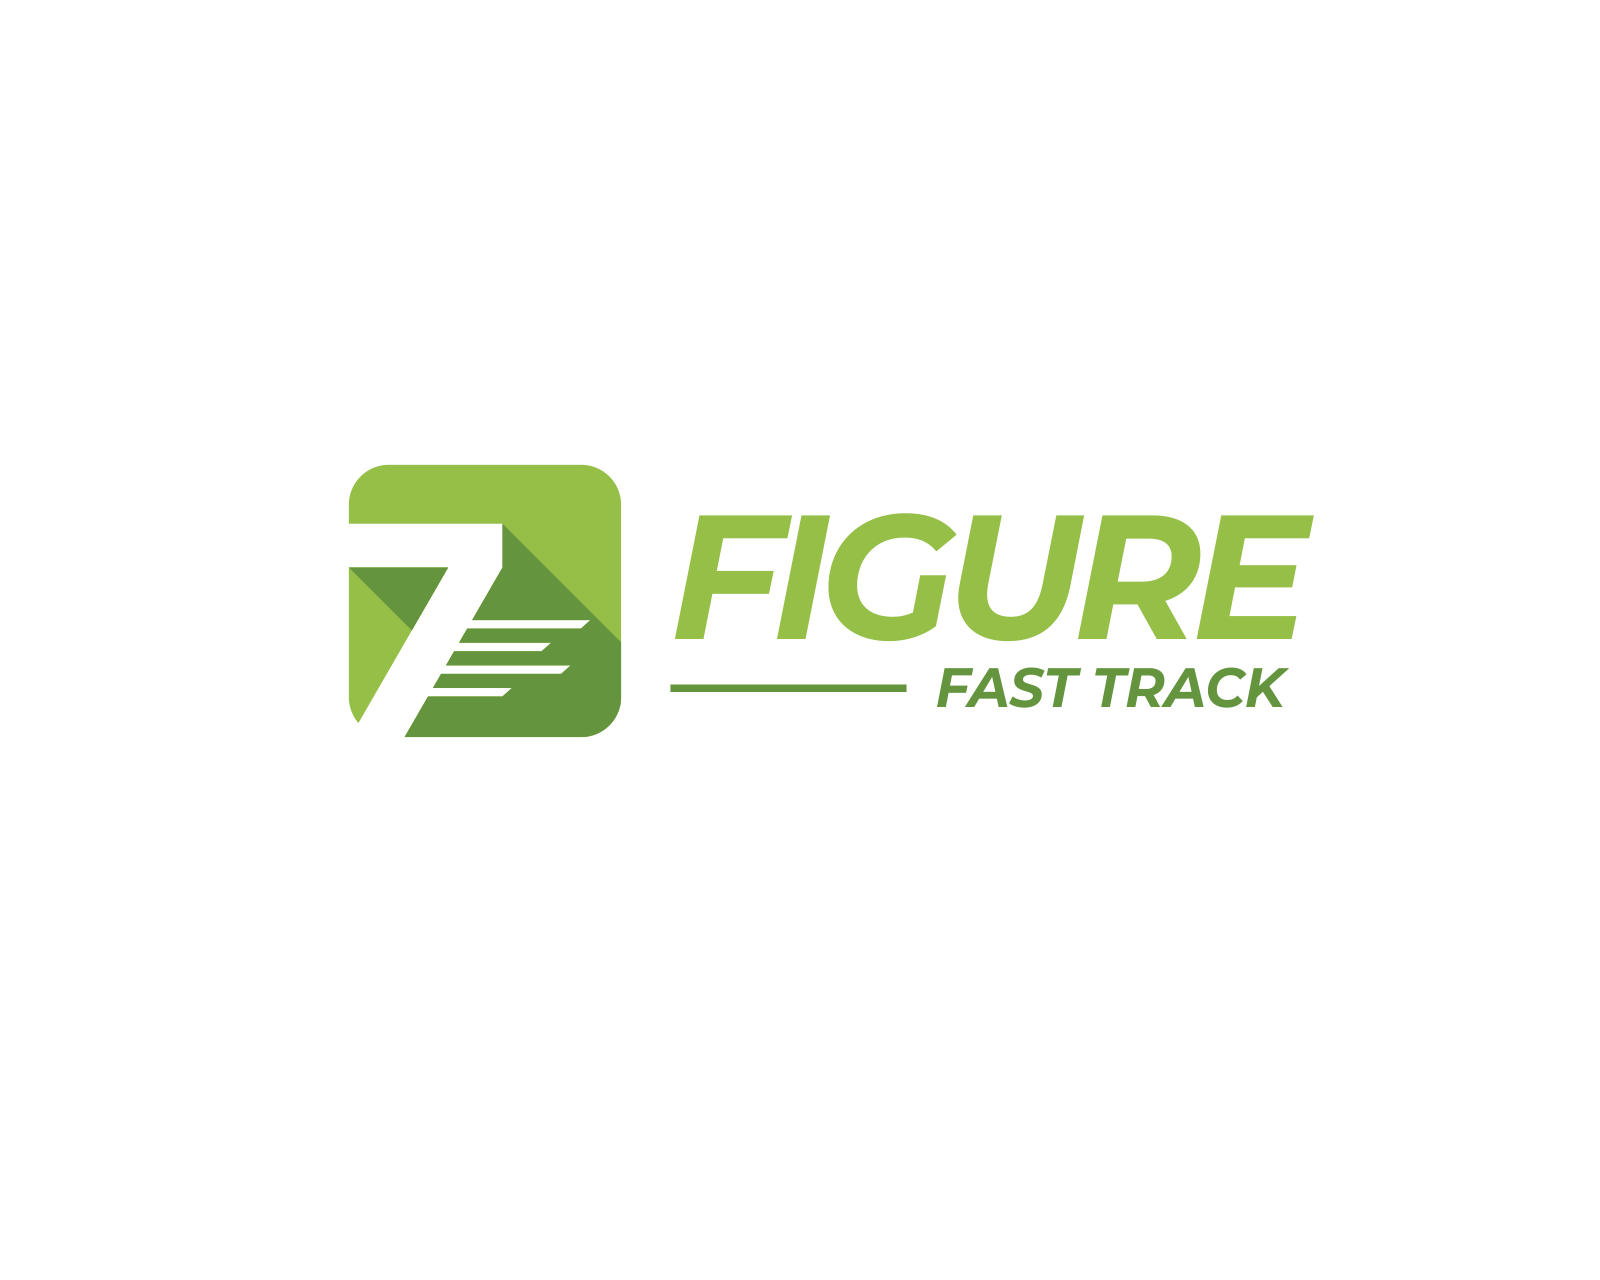 Share 100+ fast track logo best